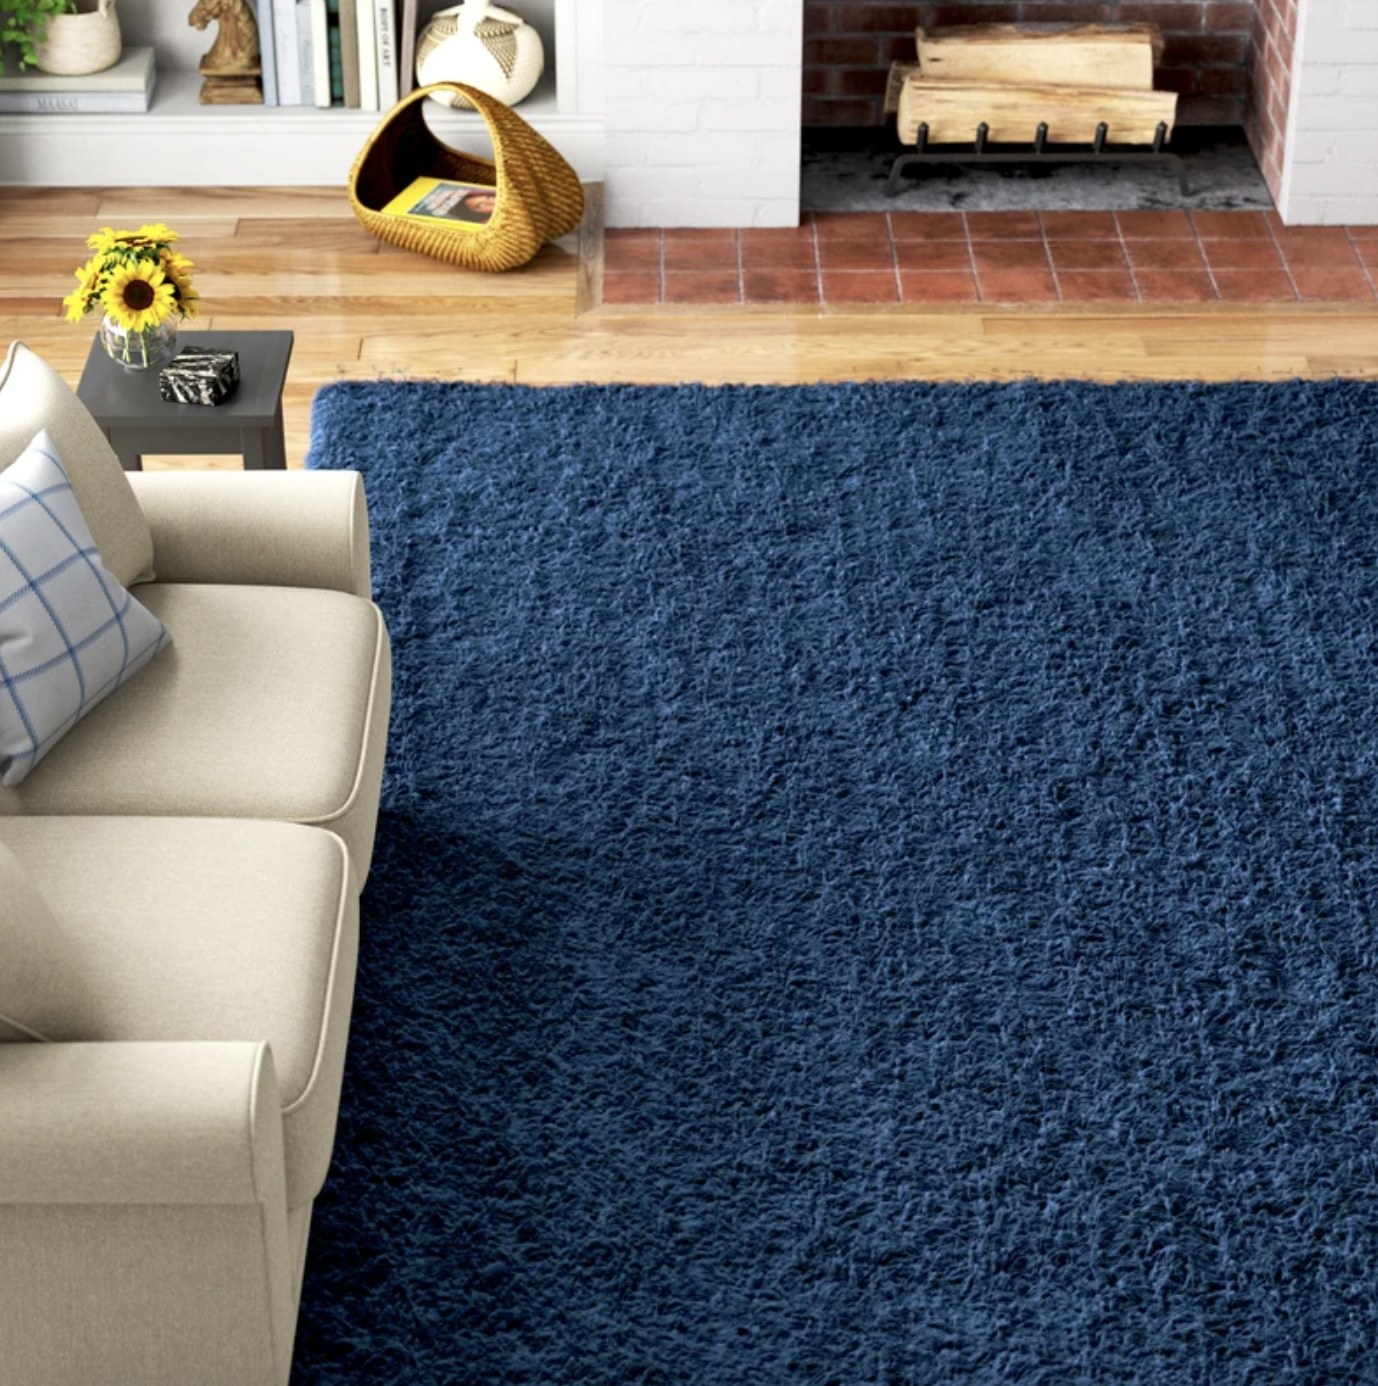 The blue thick shag rug us atop a light wooden floor in a sunlit living room